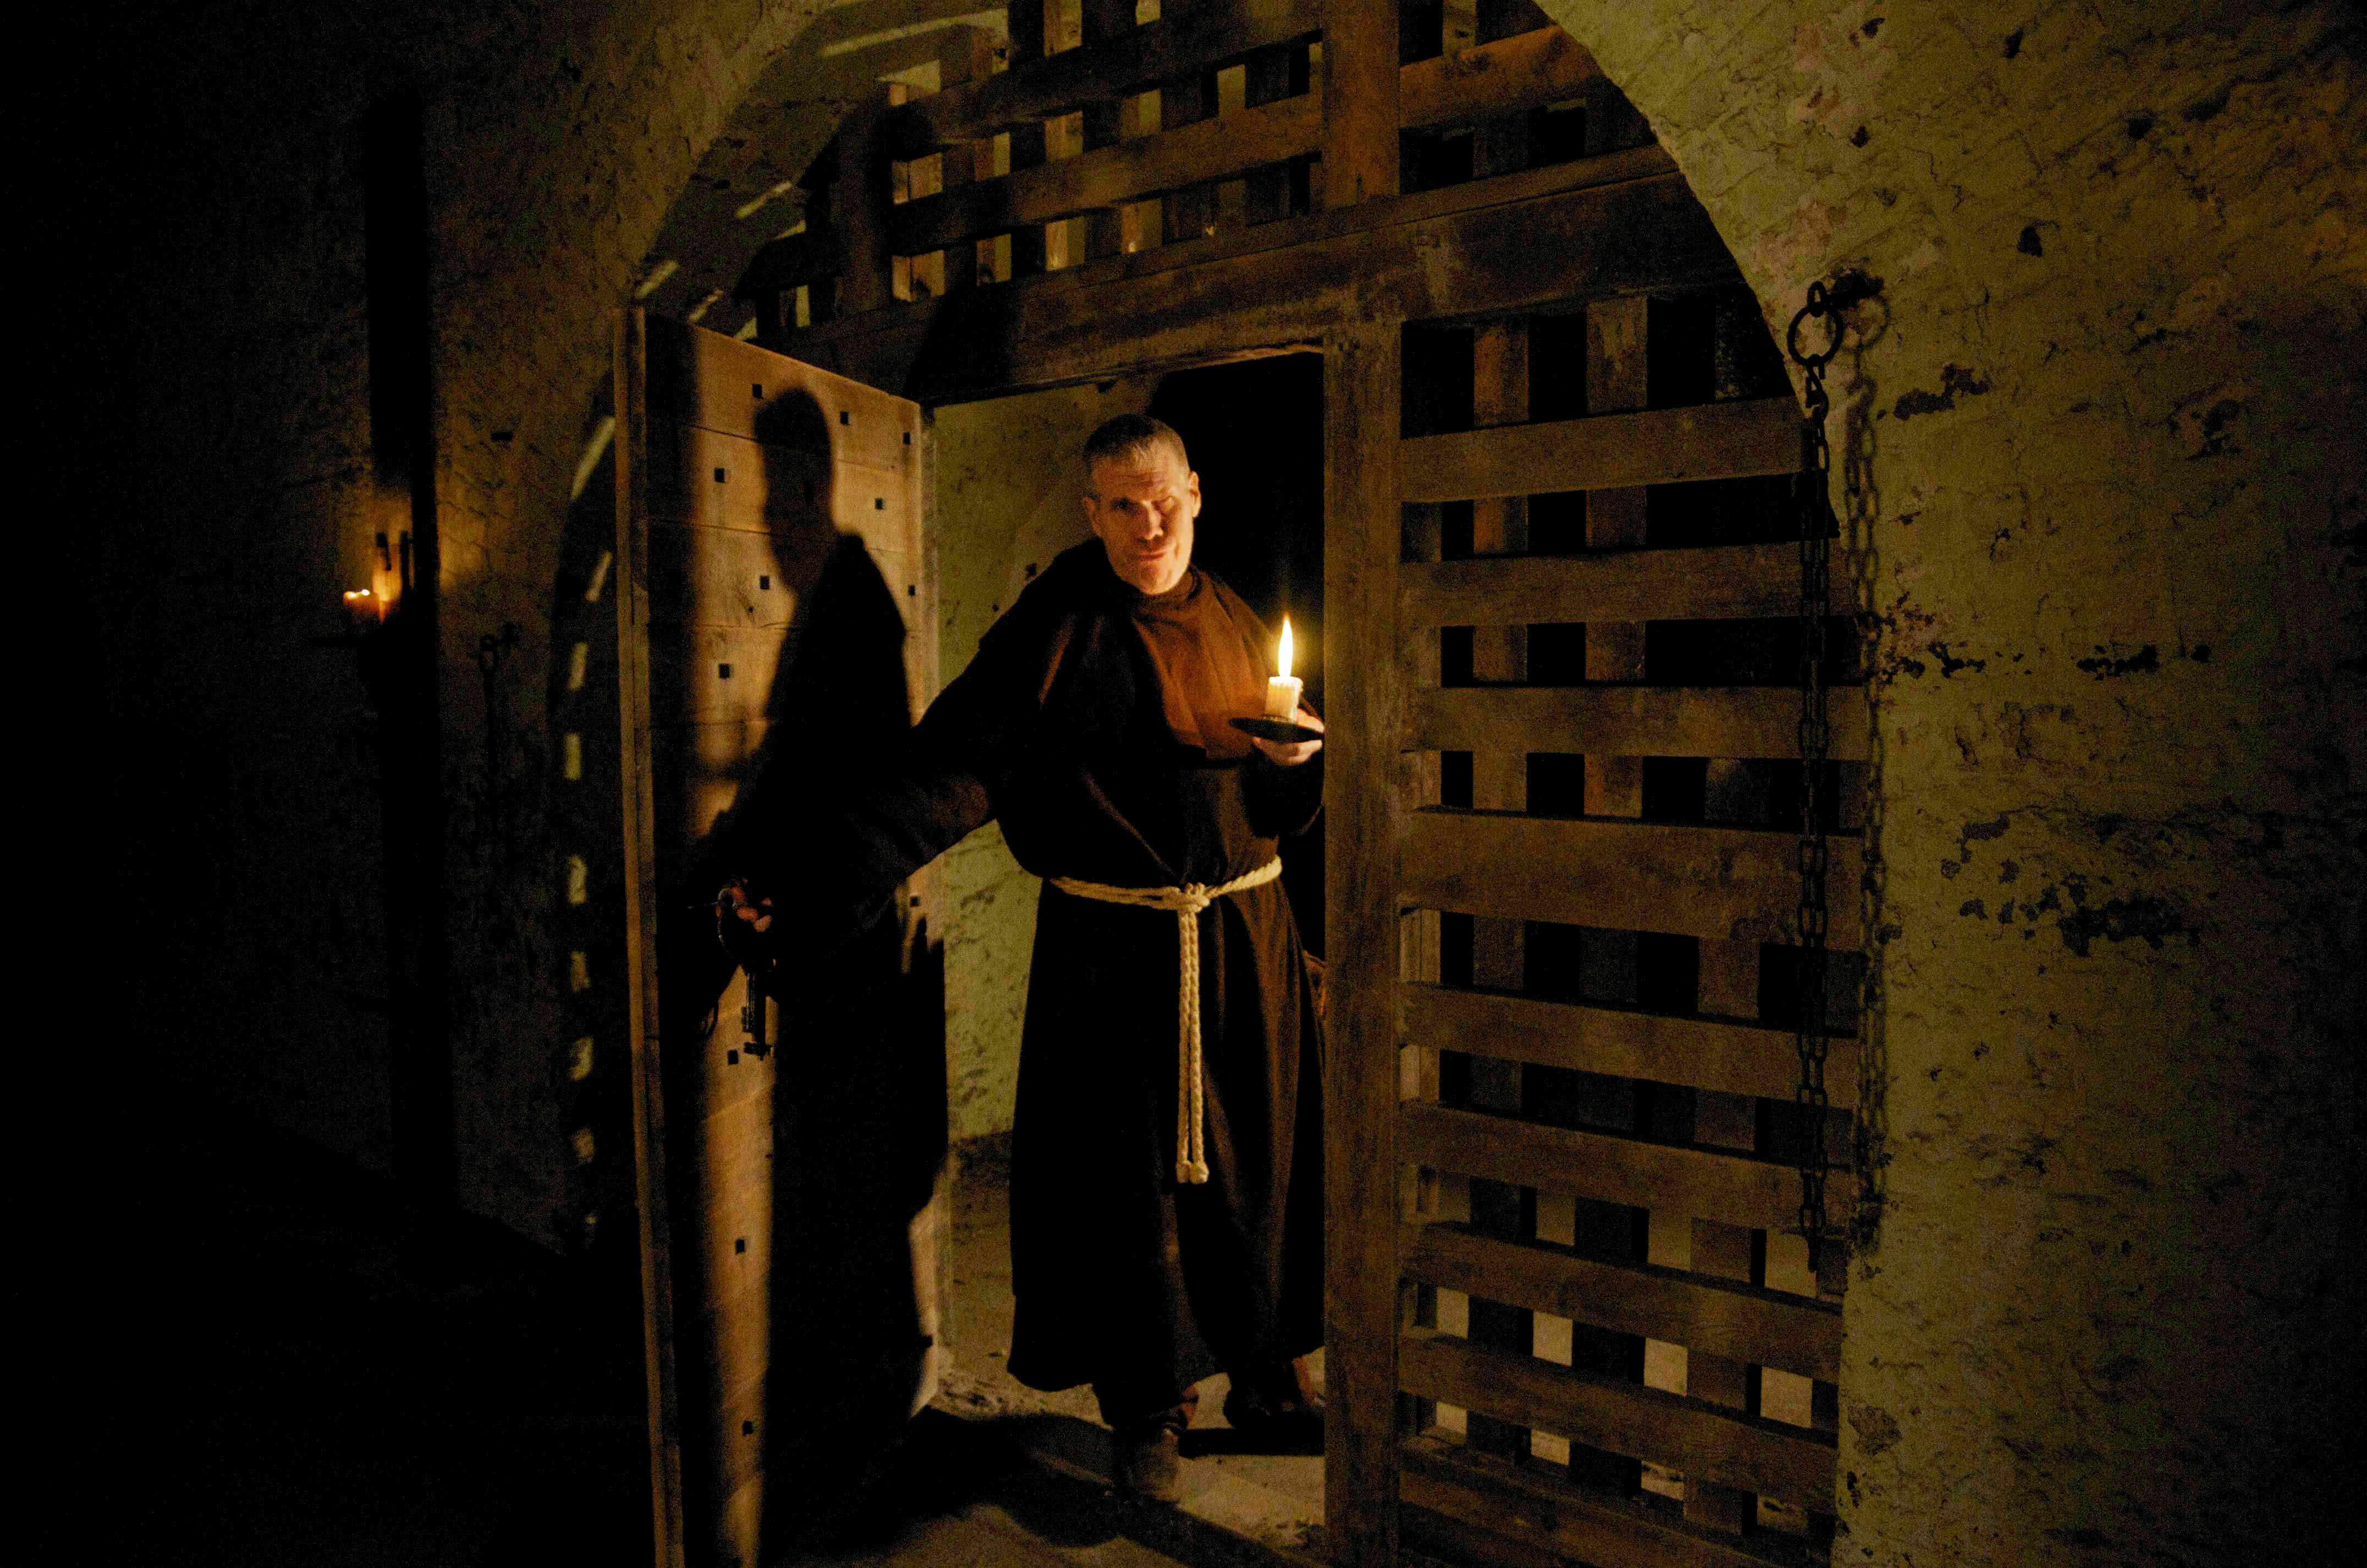 Ron Perlman stars as Priest in IFC Films' I Sell the Dead (2009)